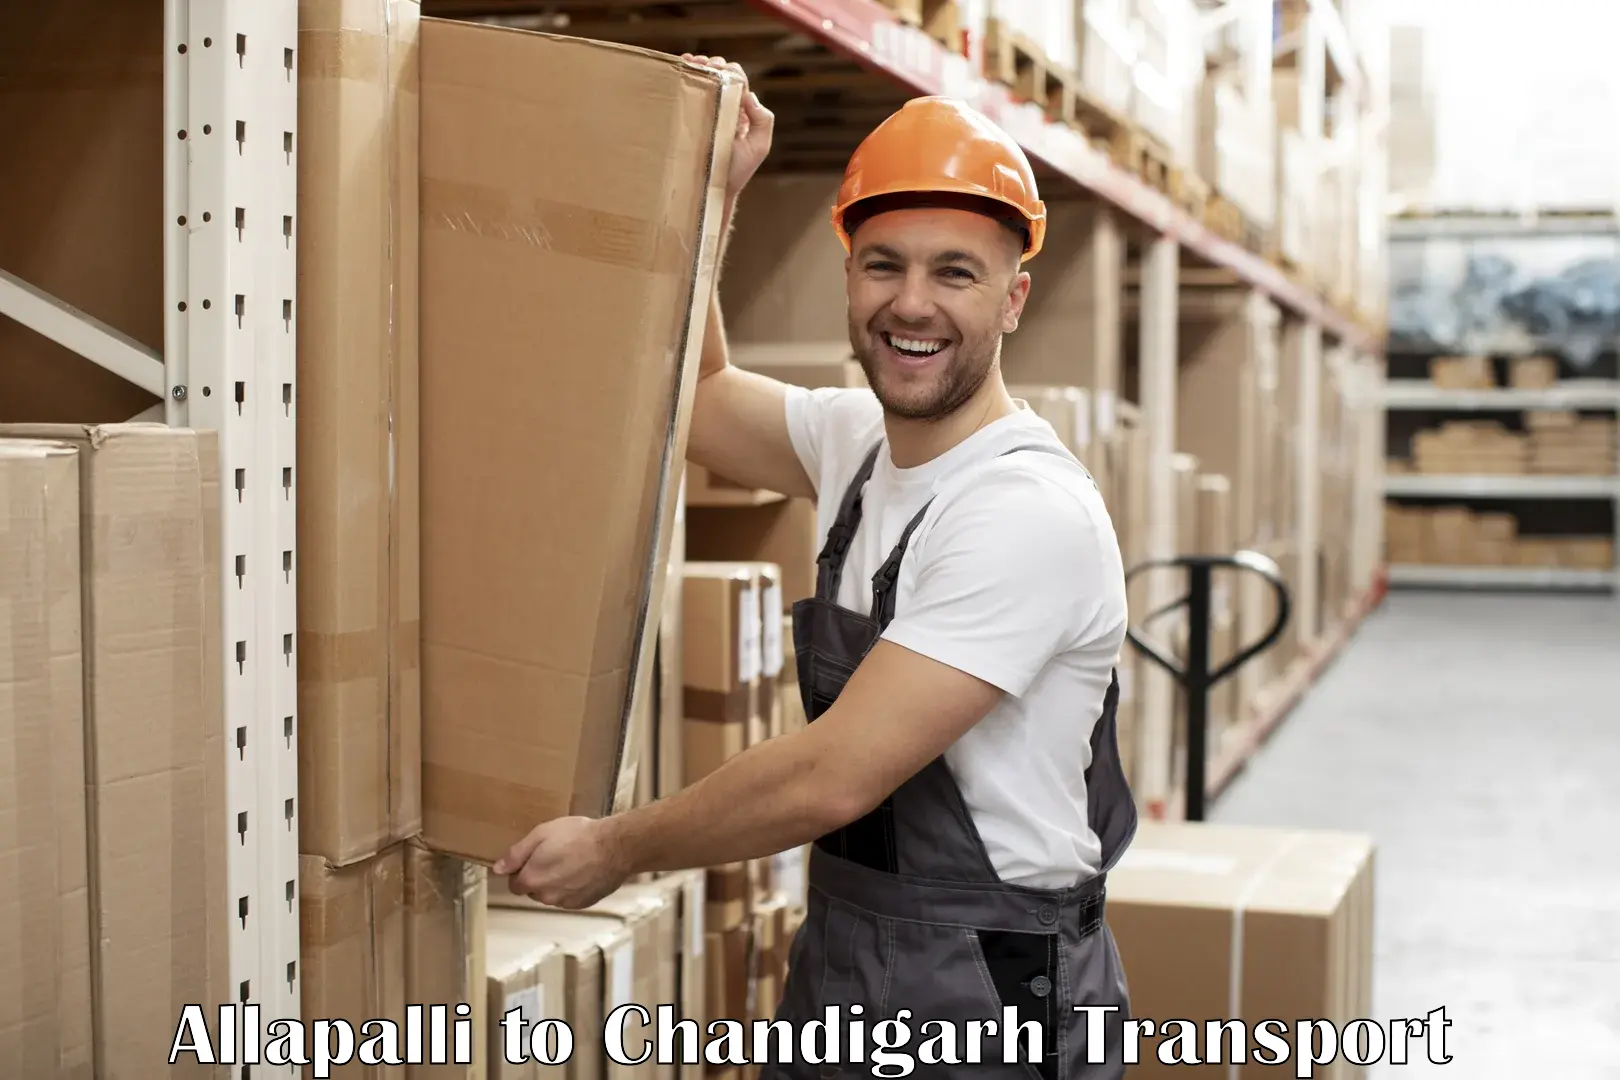 Vehicle transport services in Allapalli to Chandigarh